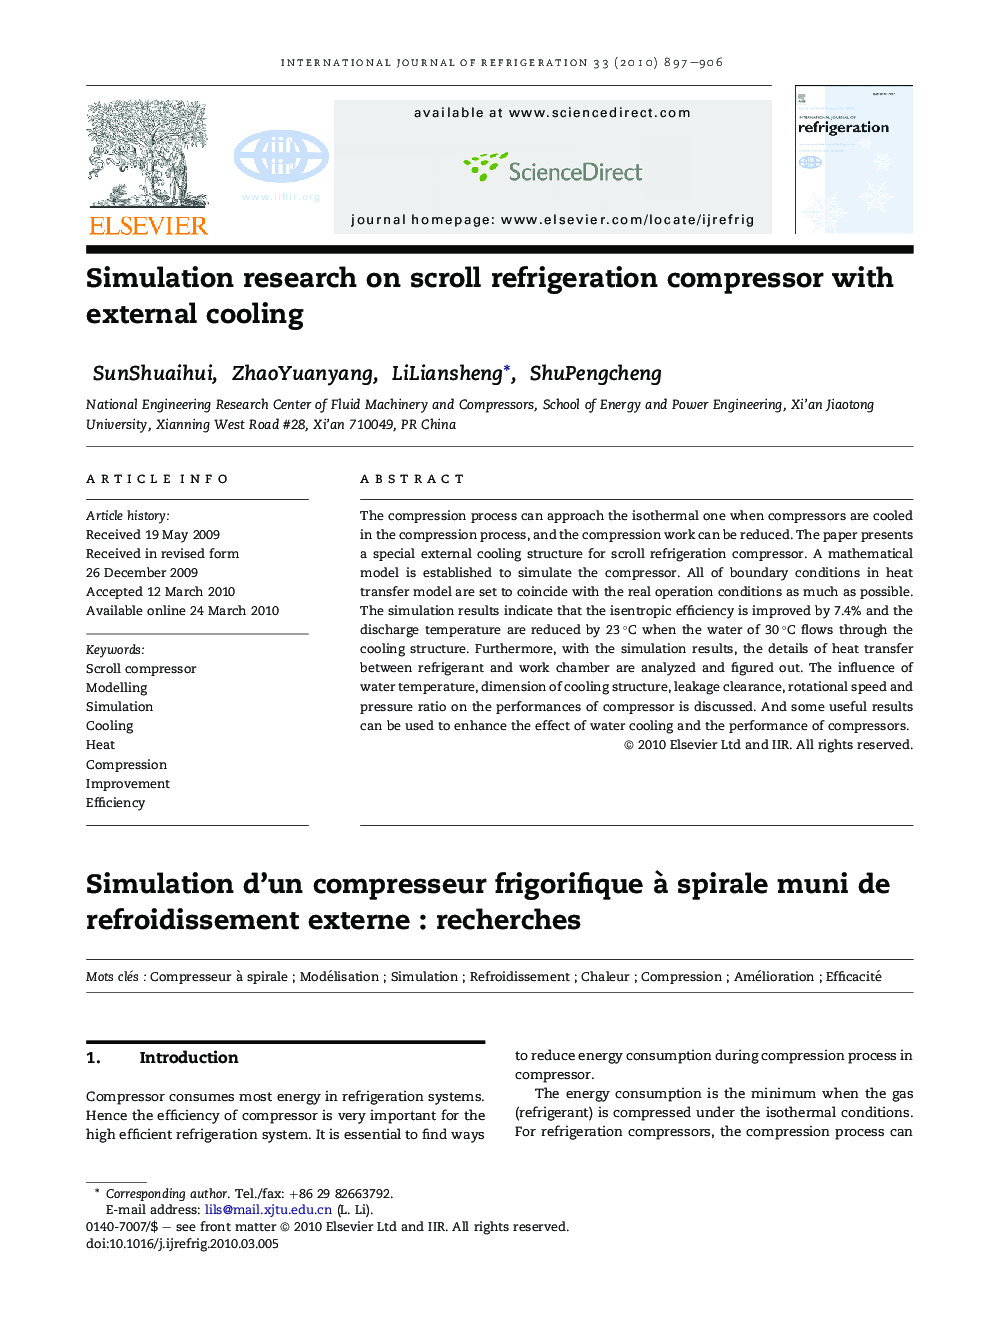 Simulation research on scroll refrigeration compressor with external cooling